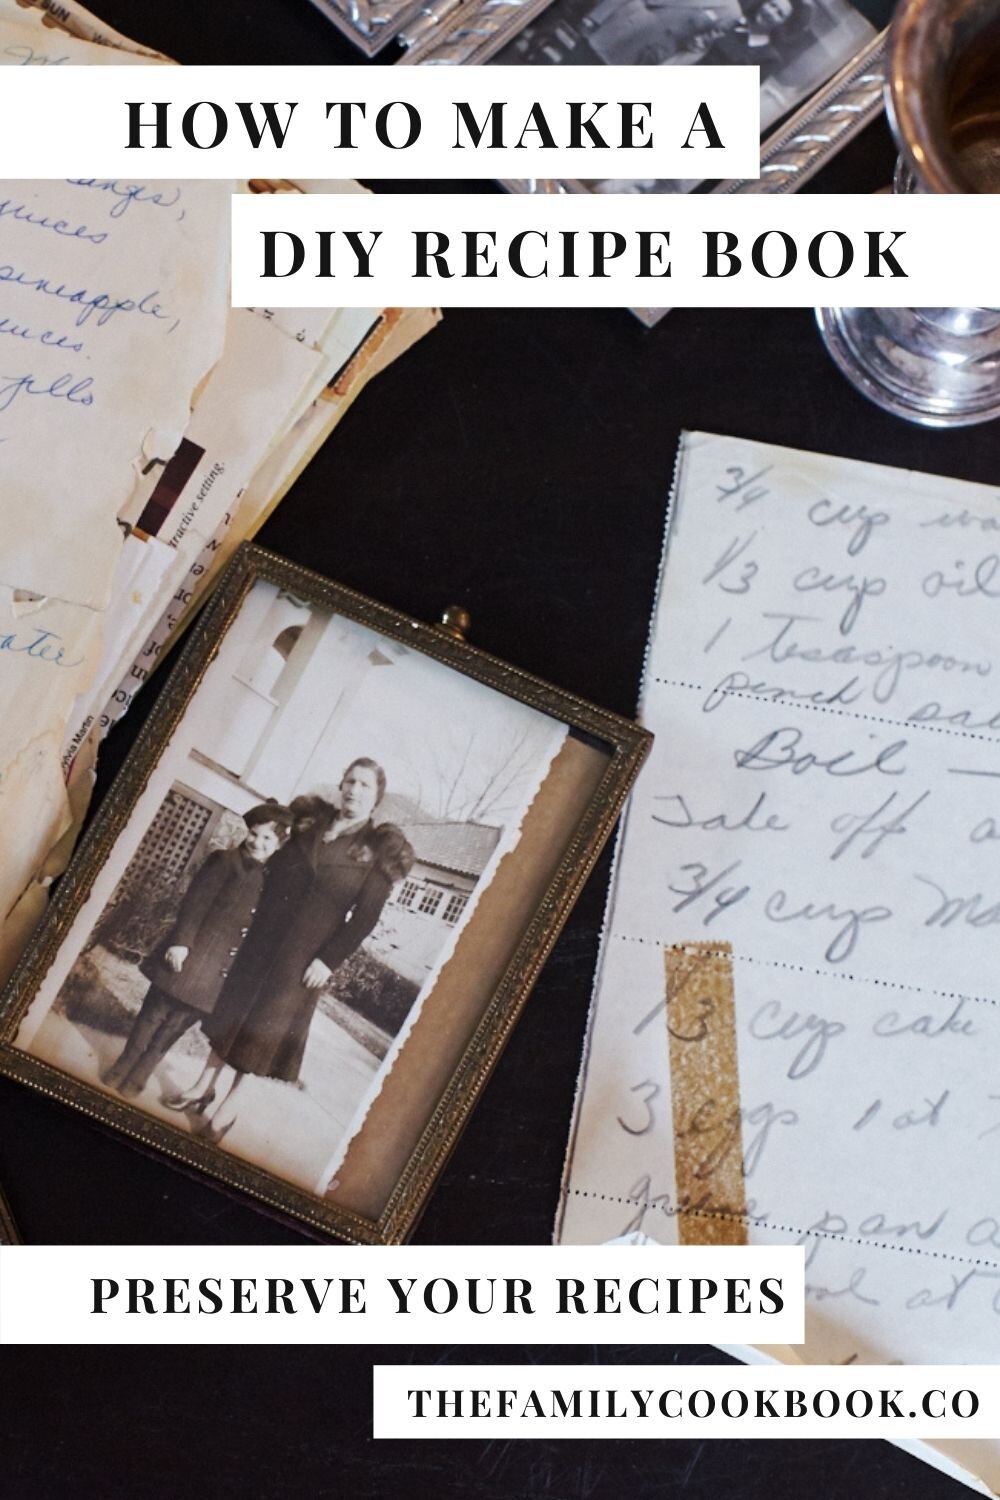 Five Easy Tips to Make Preserving Family Recipes Fun